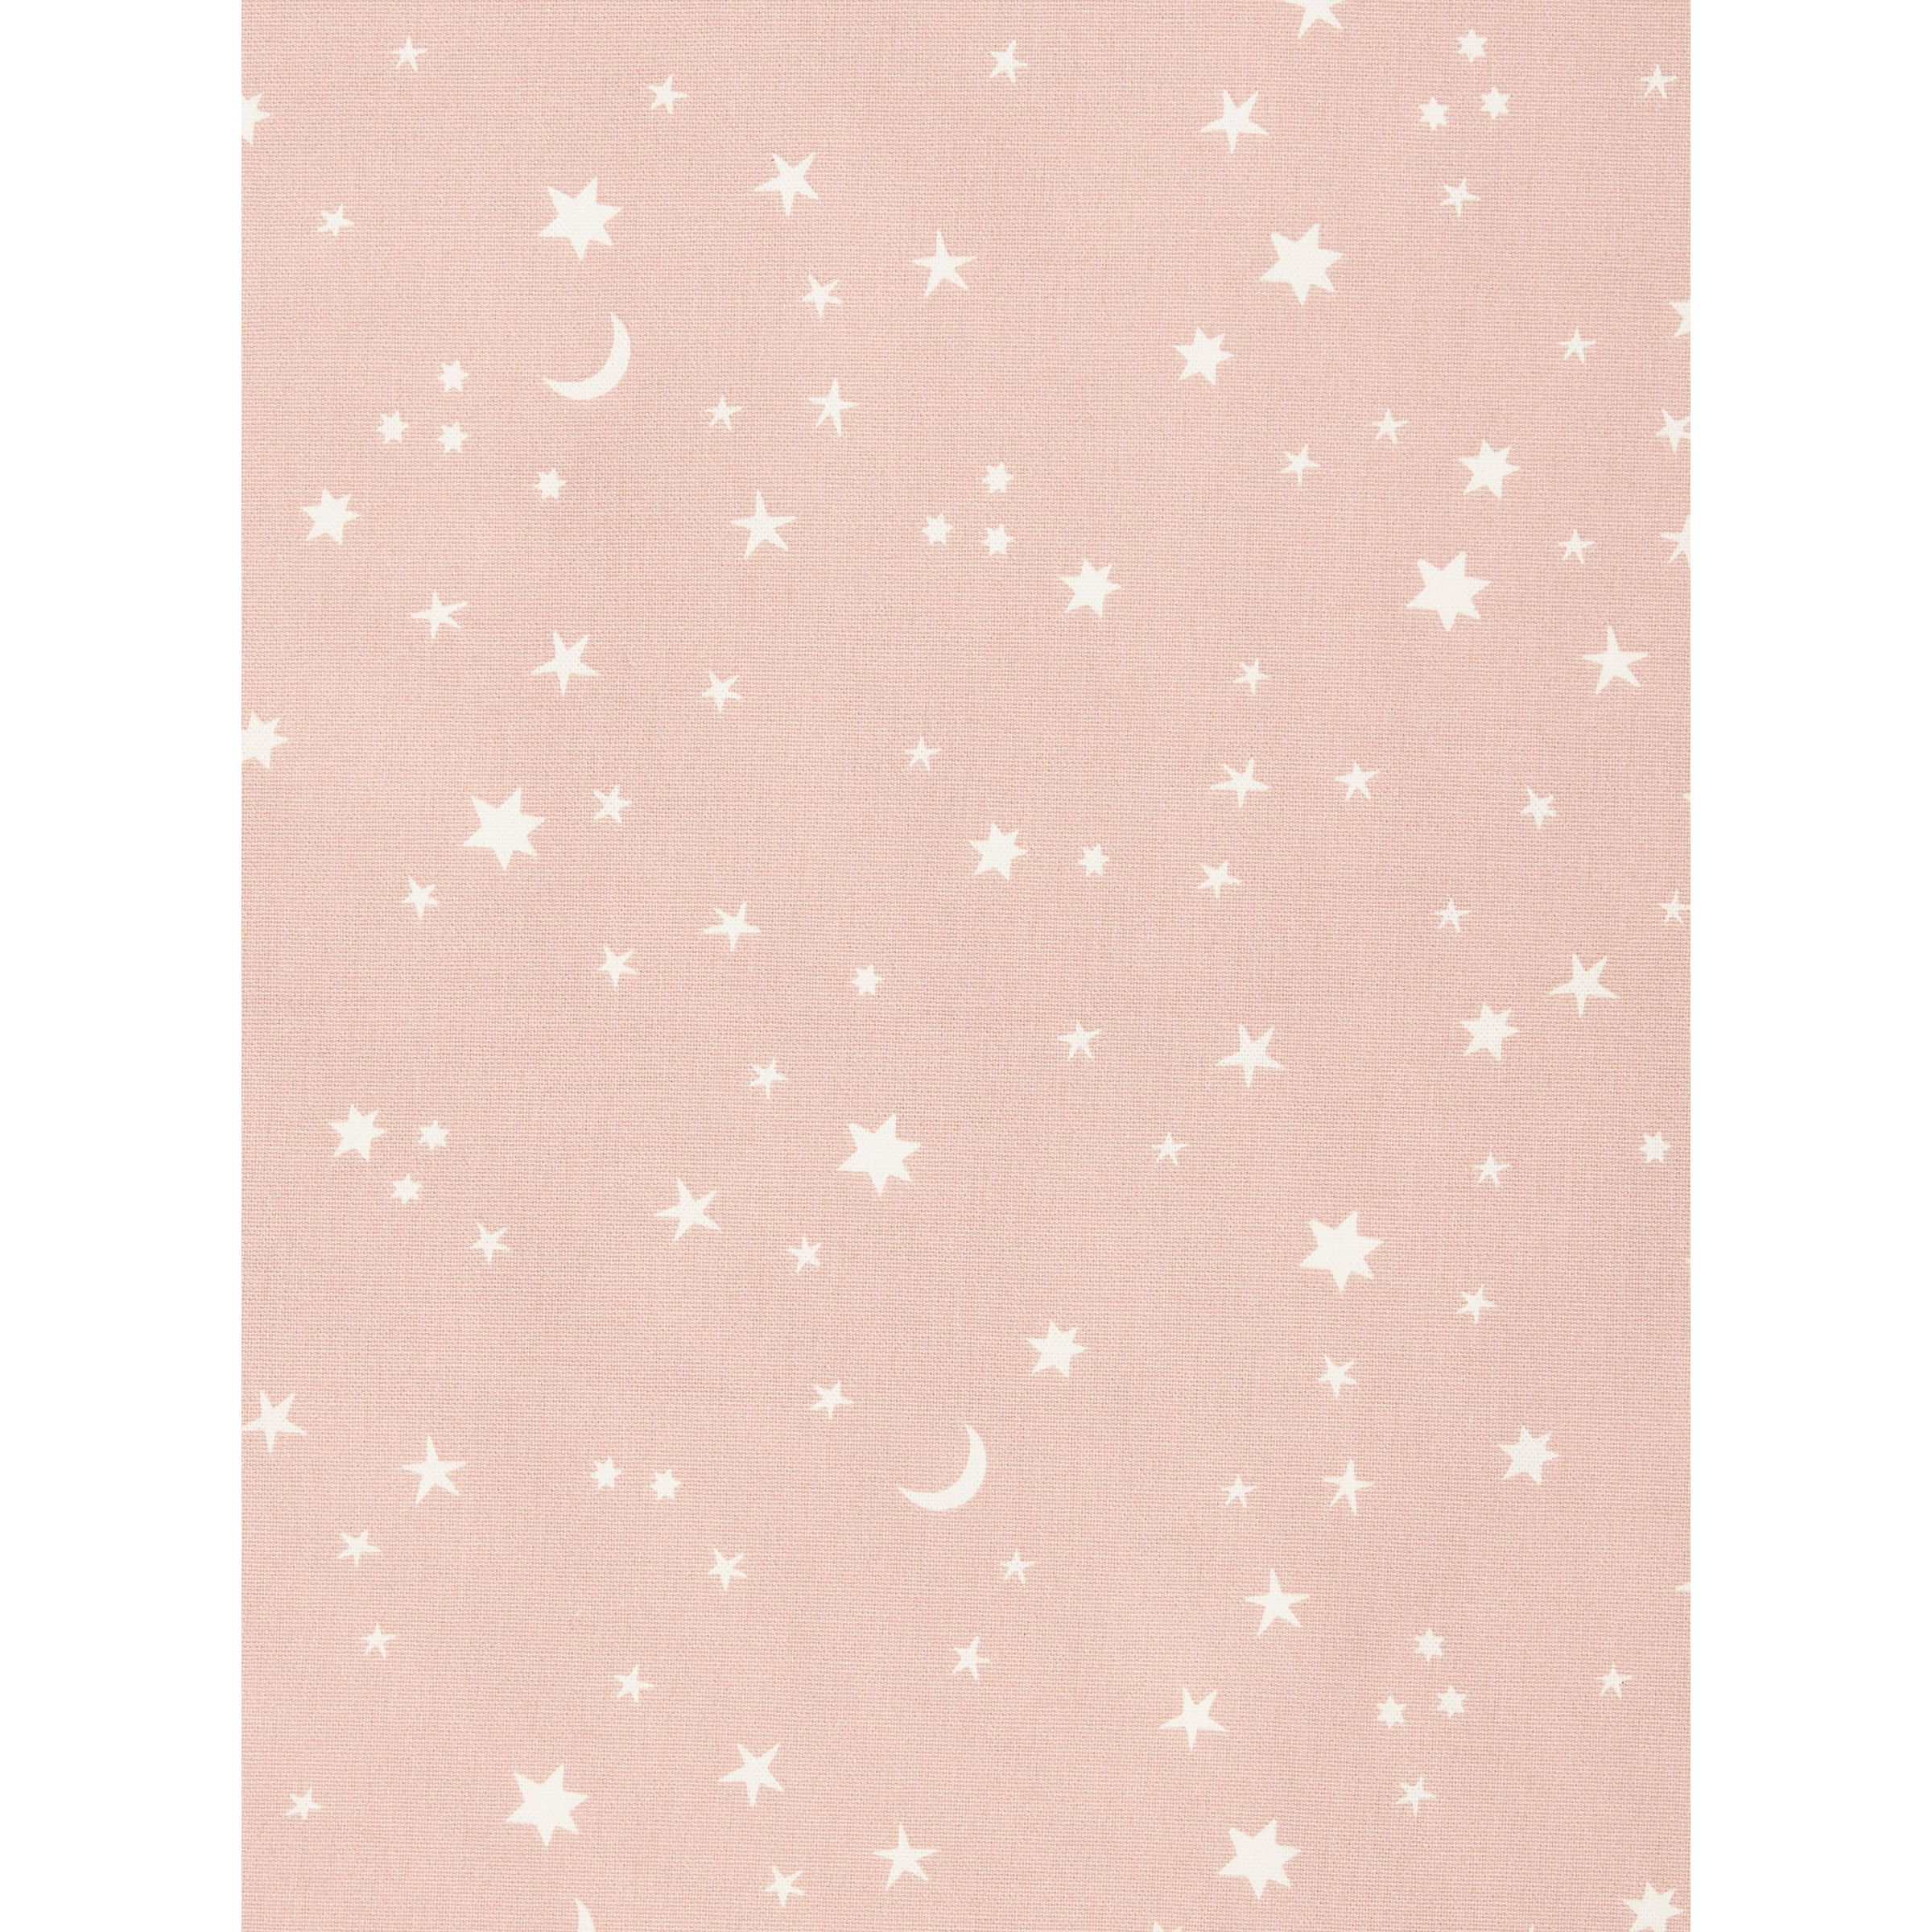 John Lewis Starry Sky Made to Measure Curtains or Roman Blind - image 1